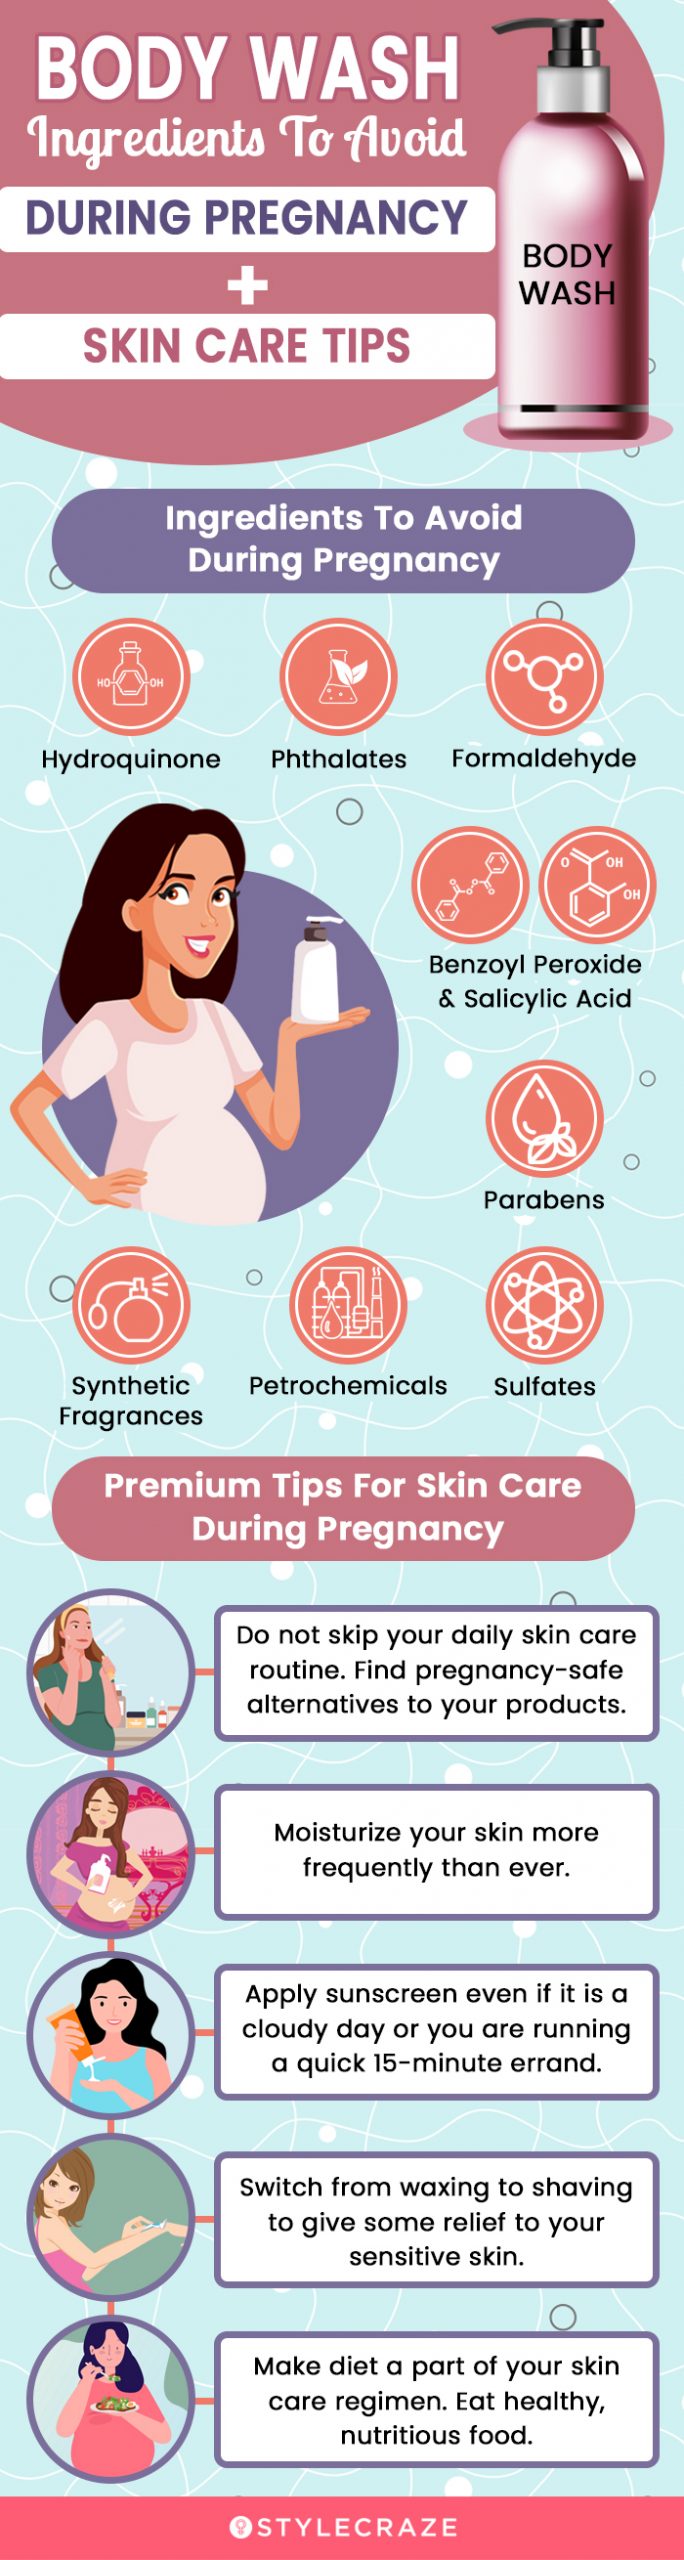 Body Wash Ingredients To Avoid During Pregnancy + Skin Care Tips (infographic)